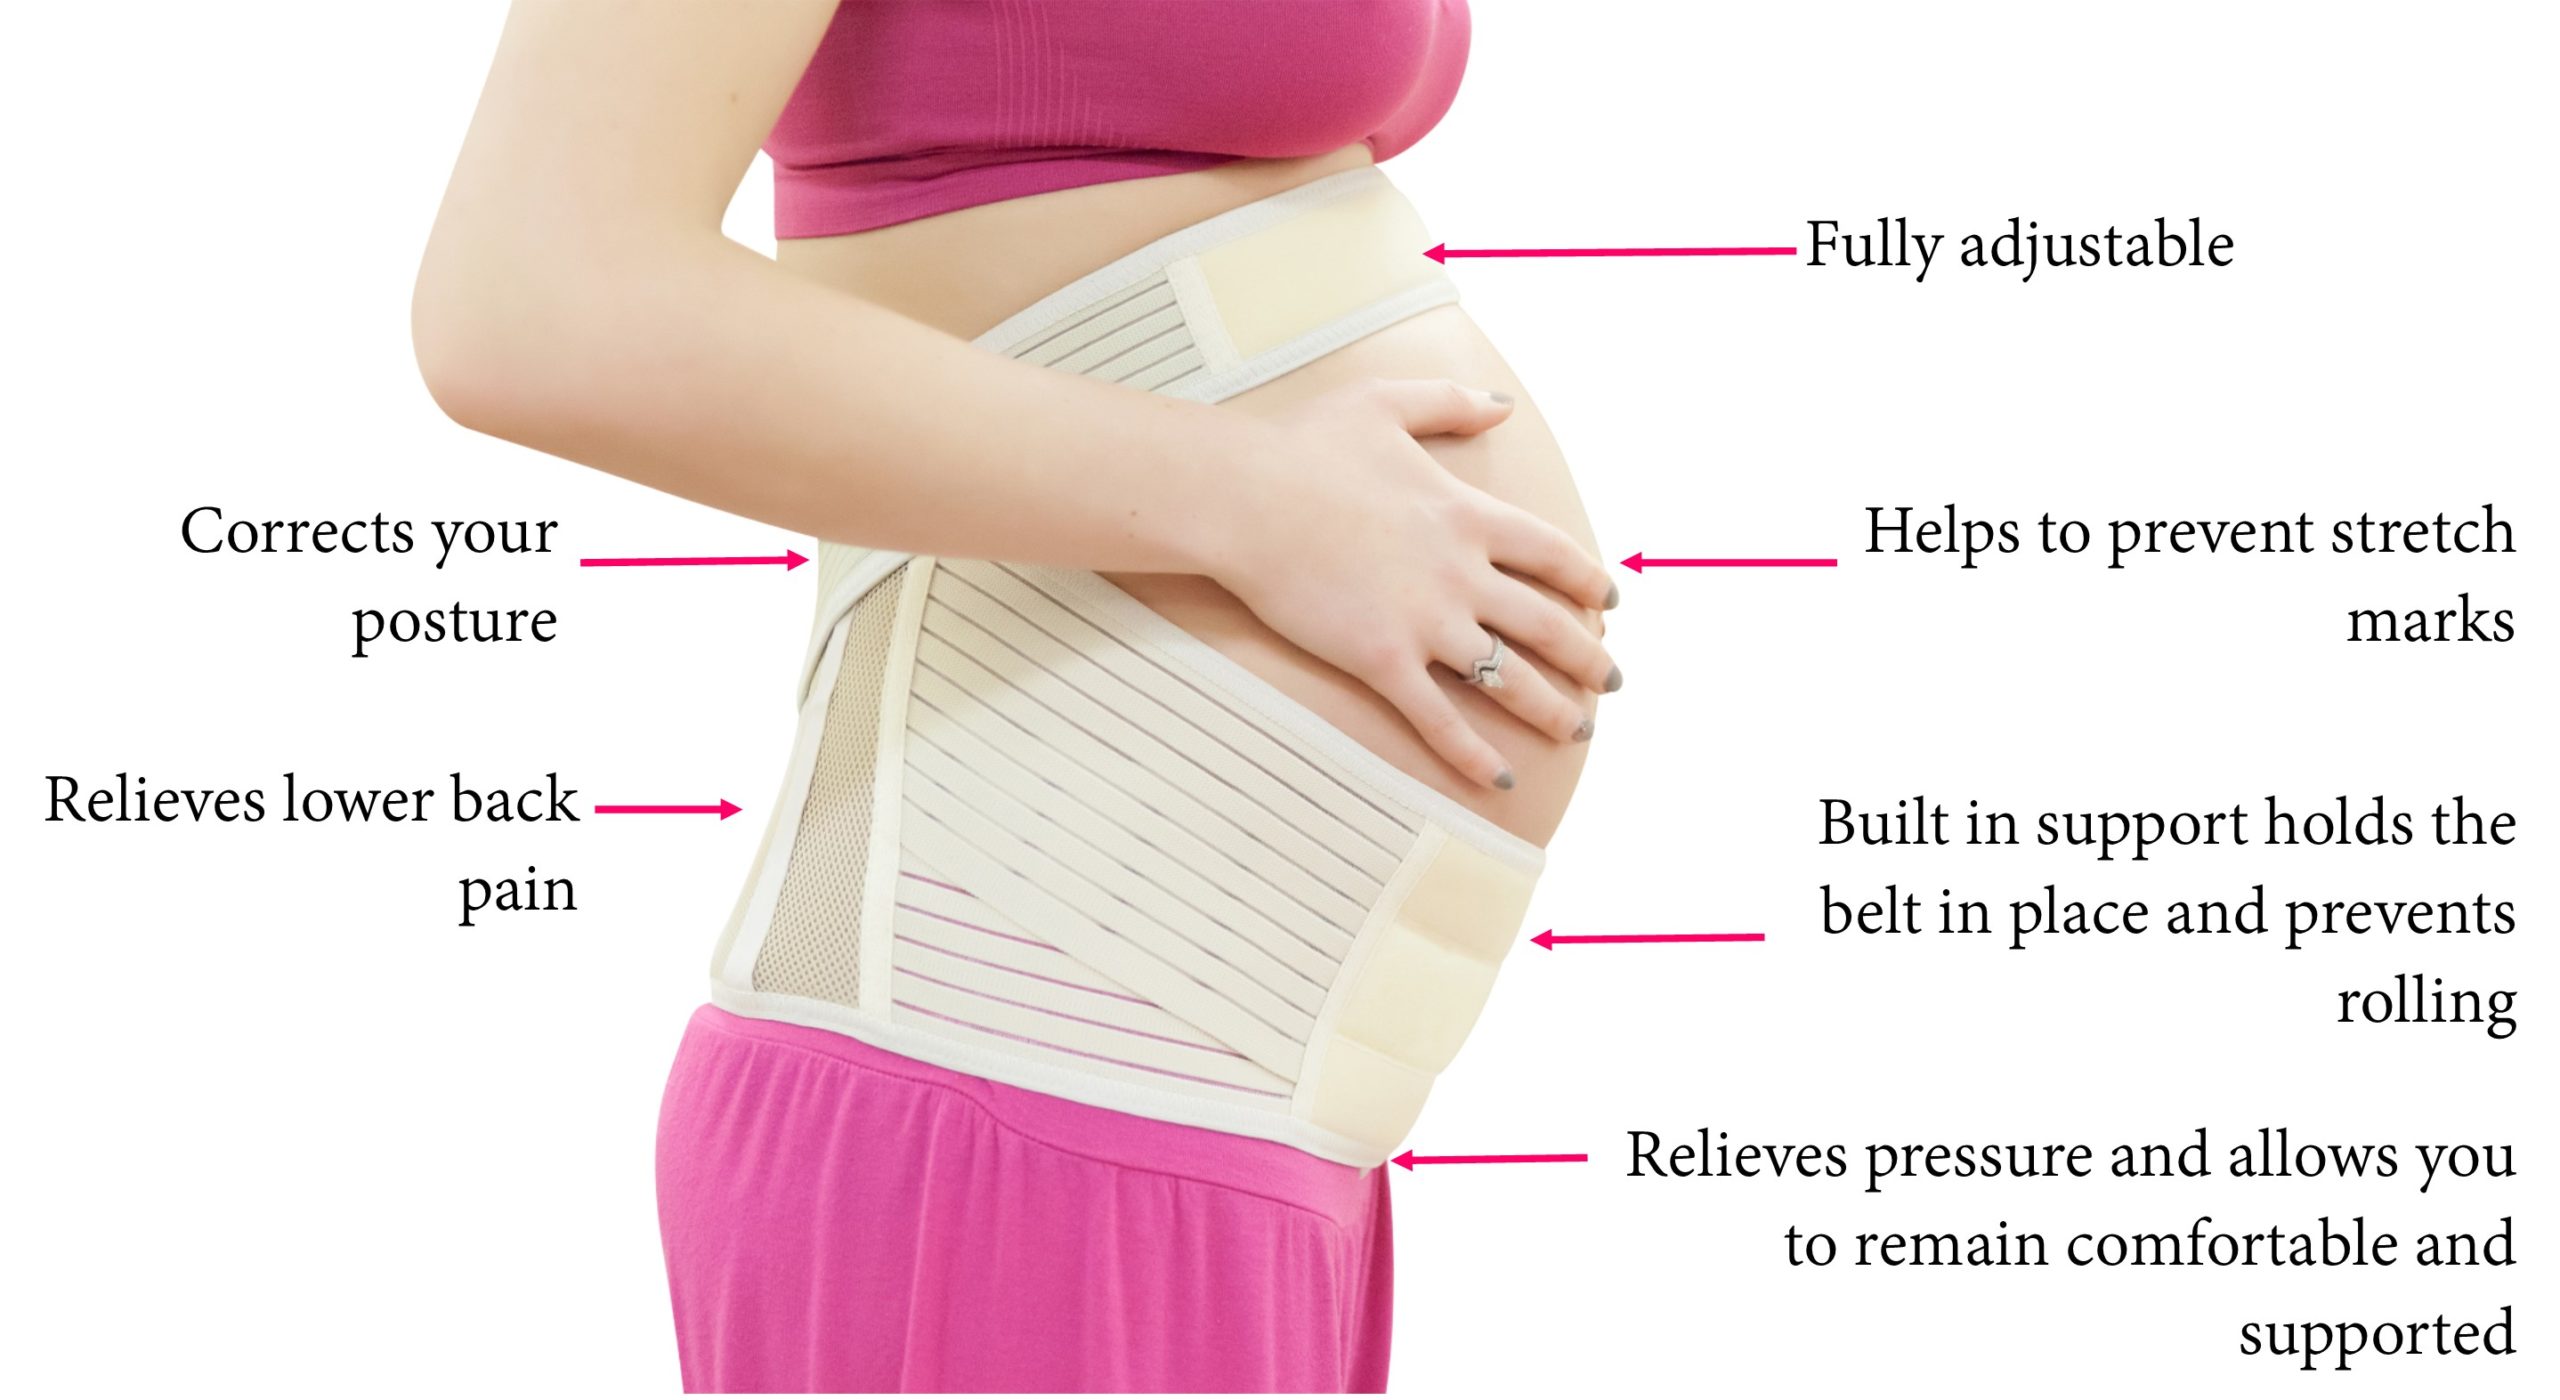 5 Ways a Maternity Support Belt Can Help You during Pregnancy